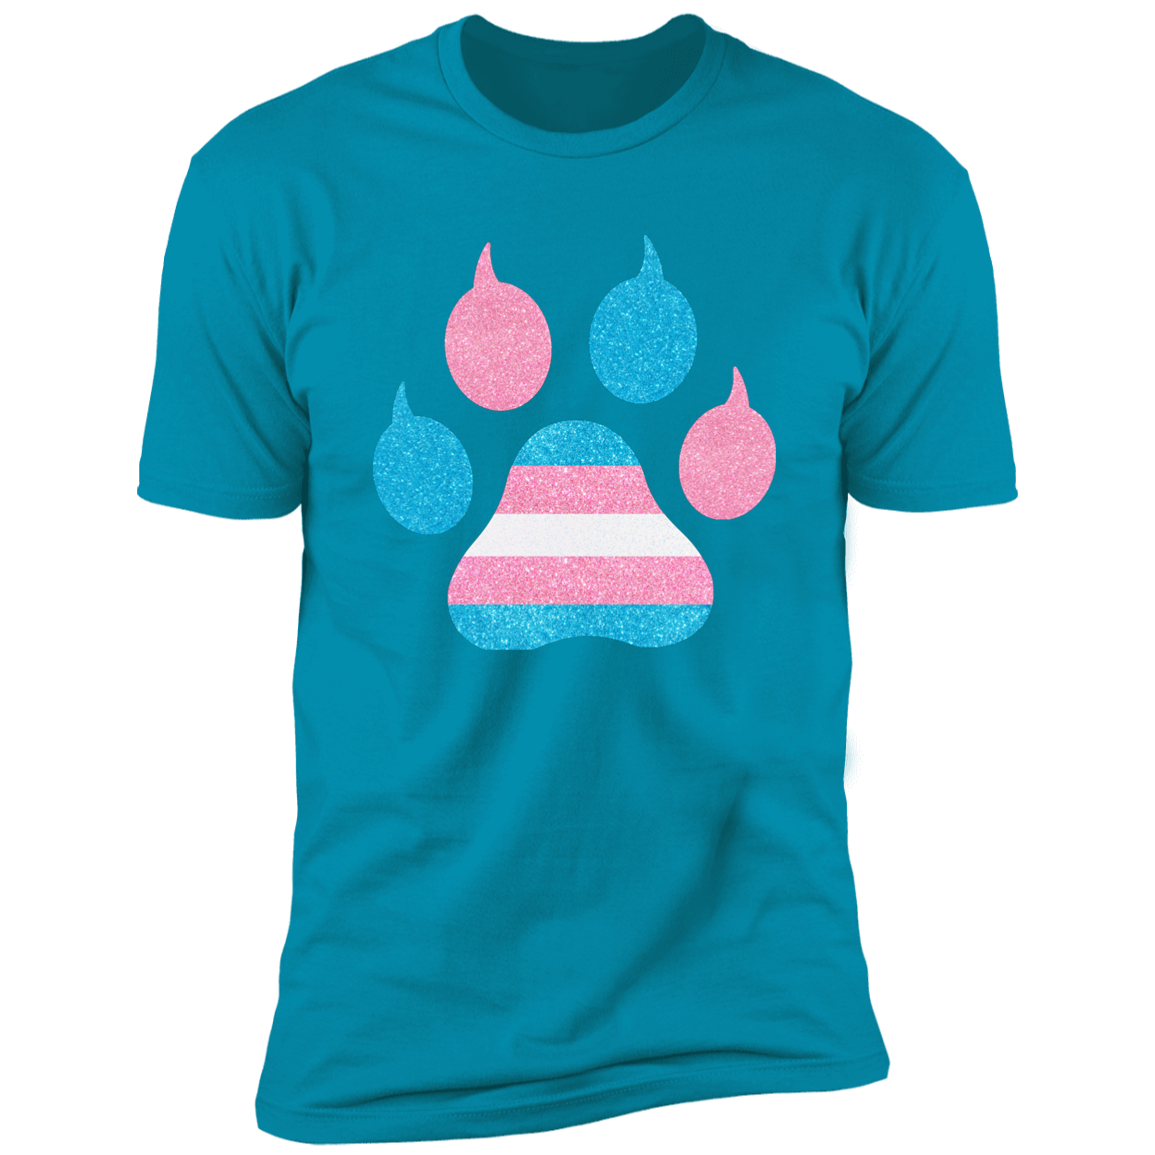 Trans Pride Cat Paw trans pride t-shirt,  trans cat paw pride shirt for humans, in turquoise